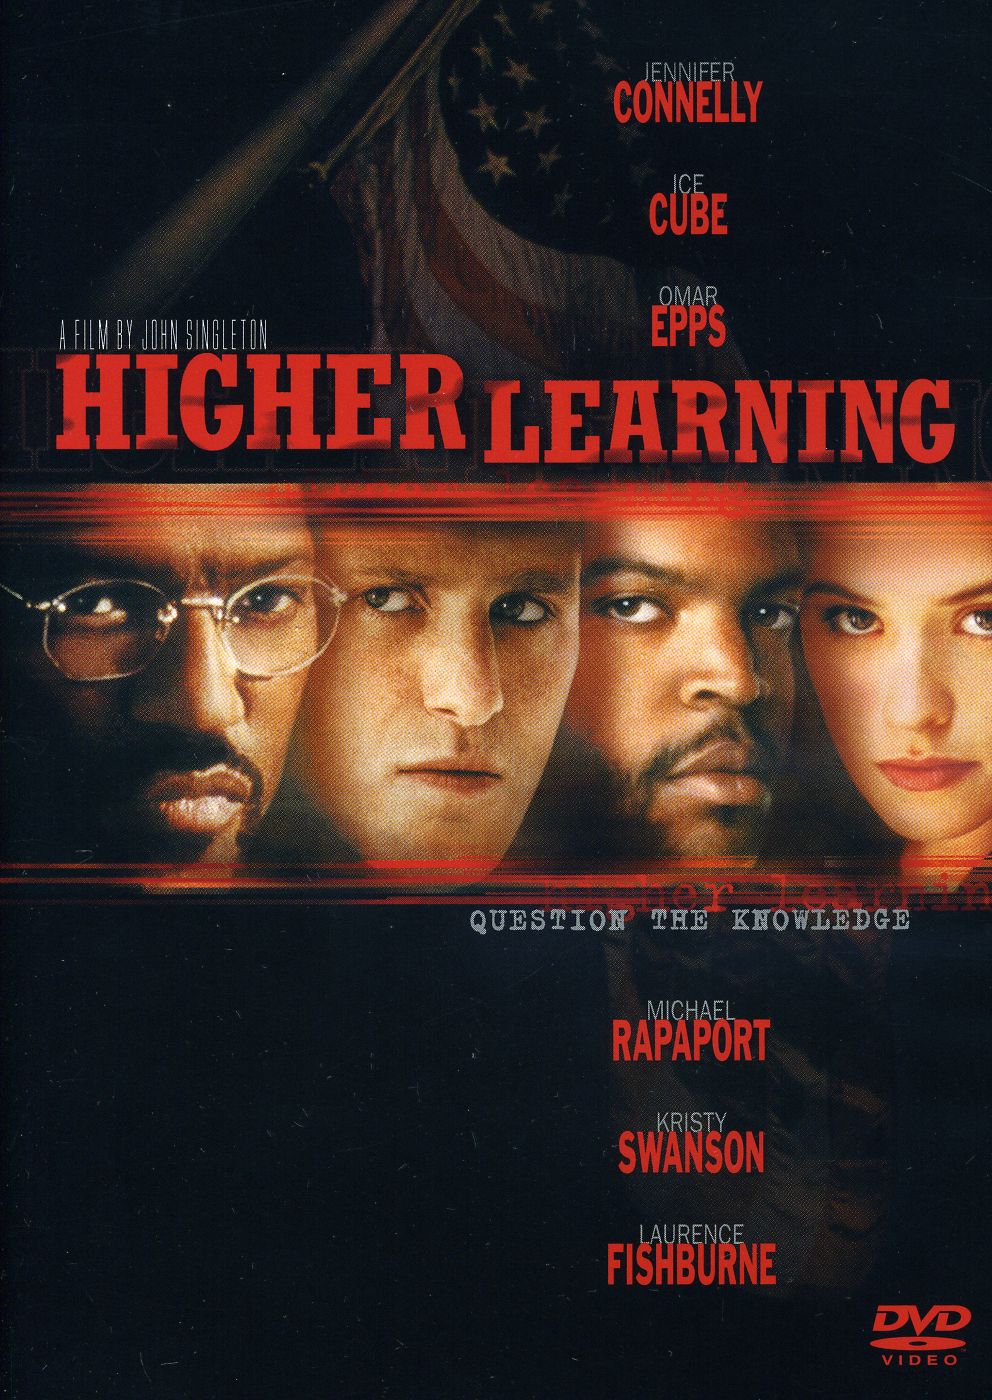 HIGHER LEARNING / (SUB WS)